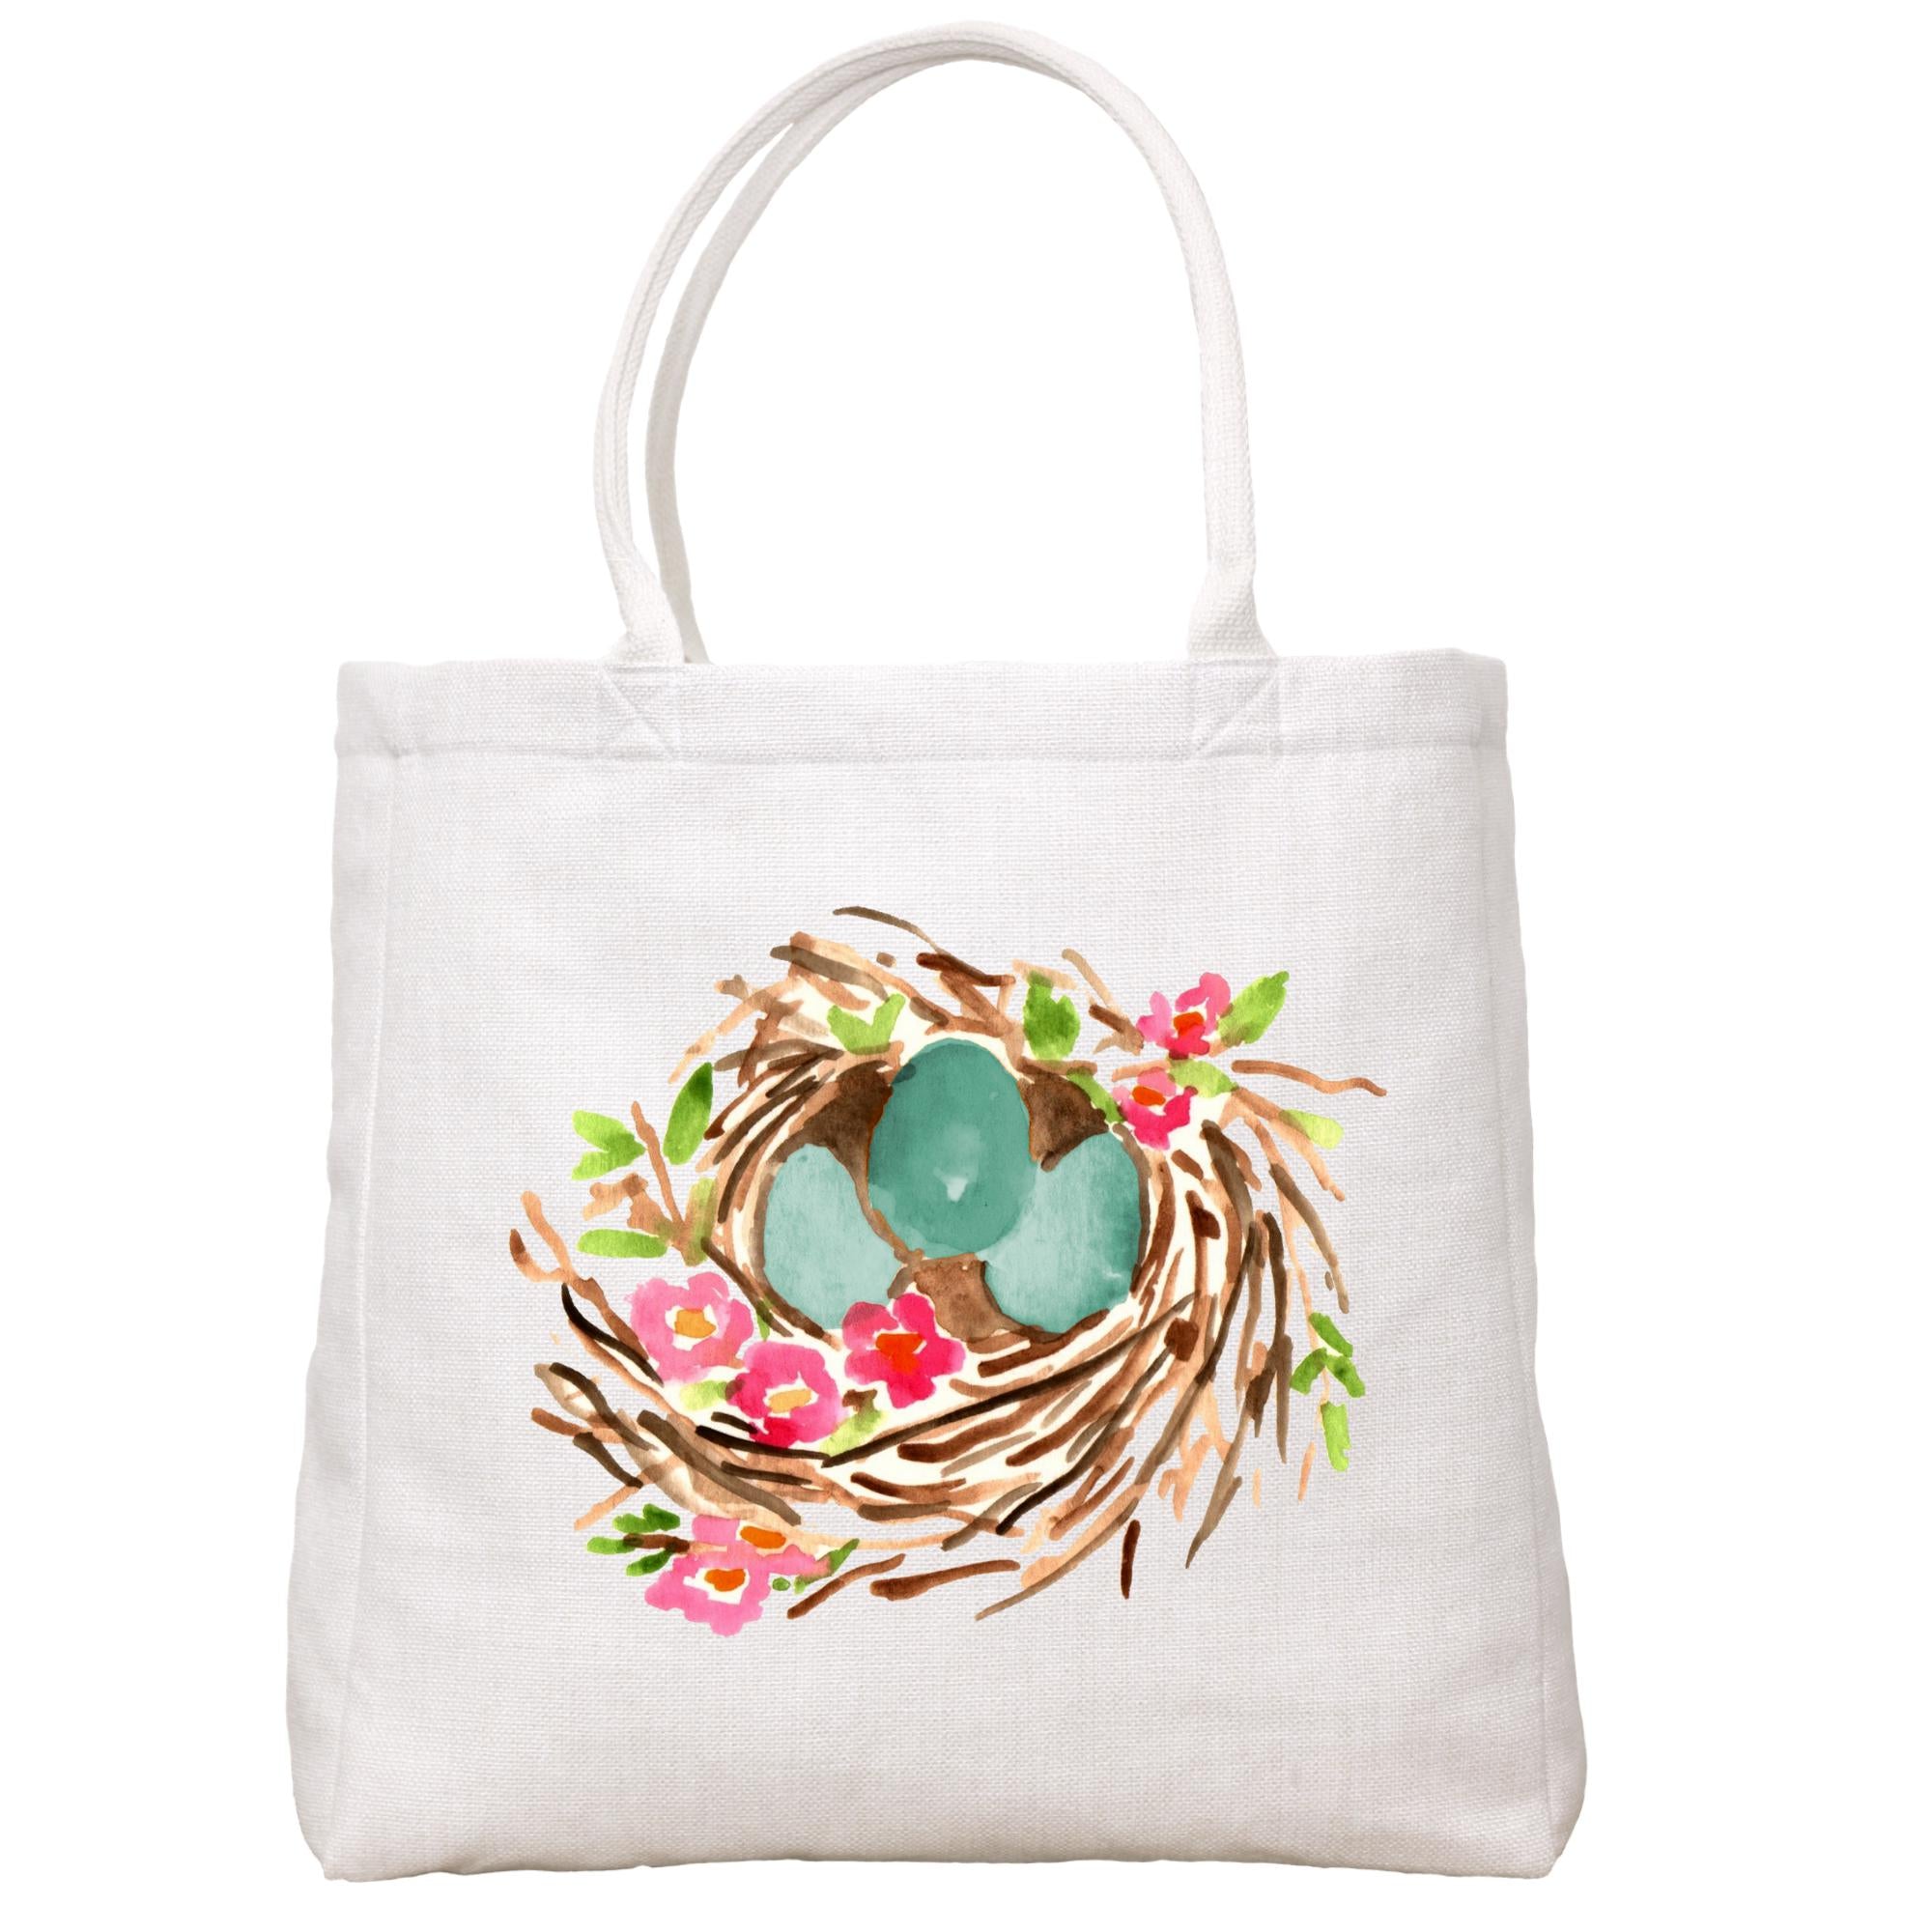 Nest With Blue Eggs Tote Bag Tote Bag - Southern Sisters